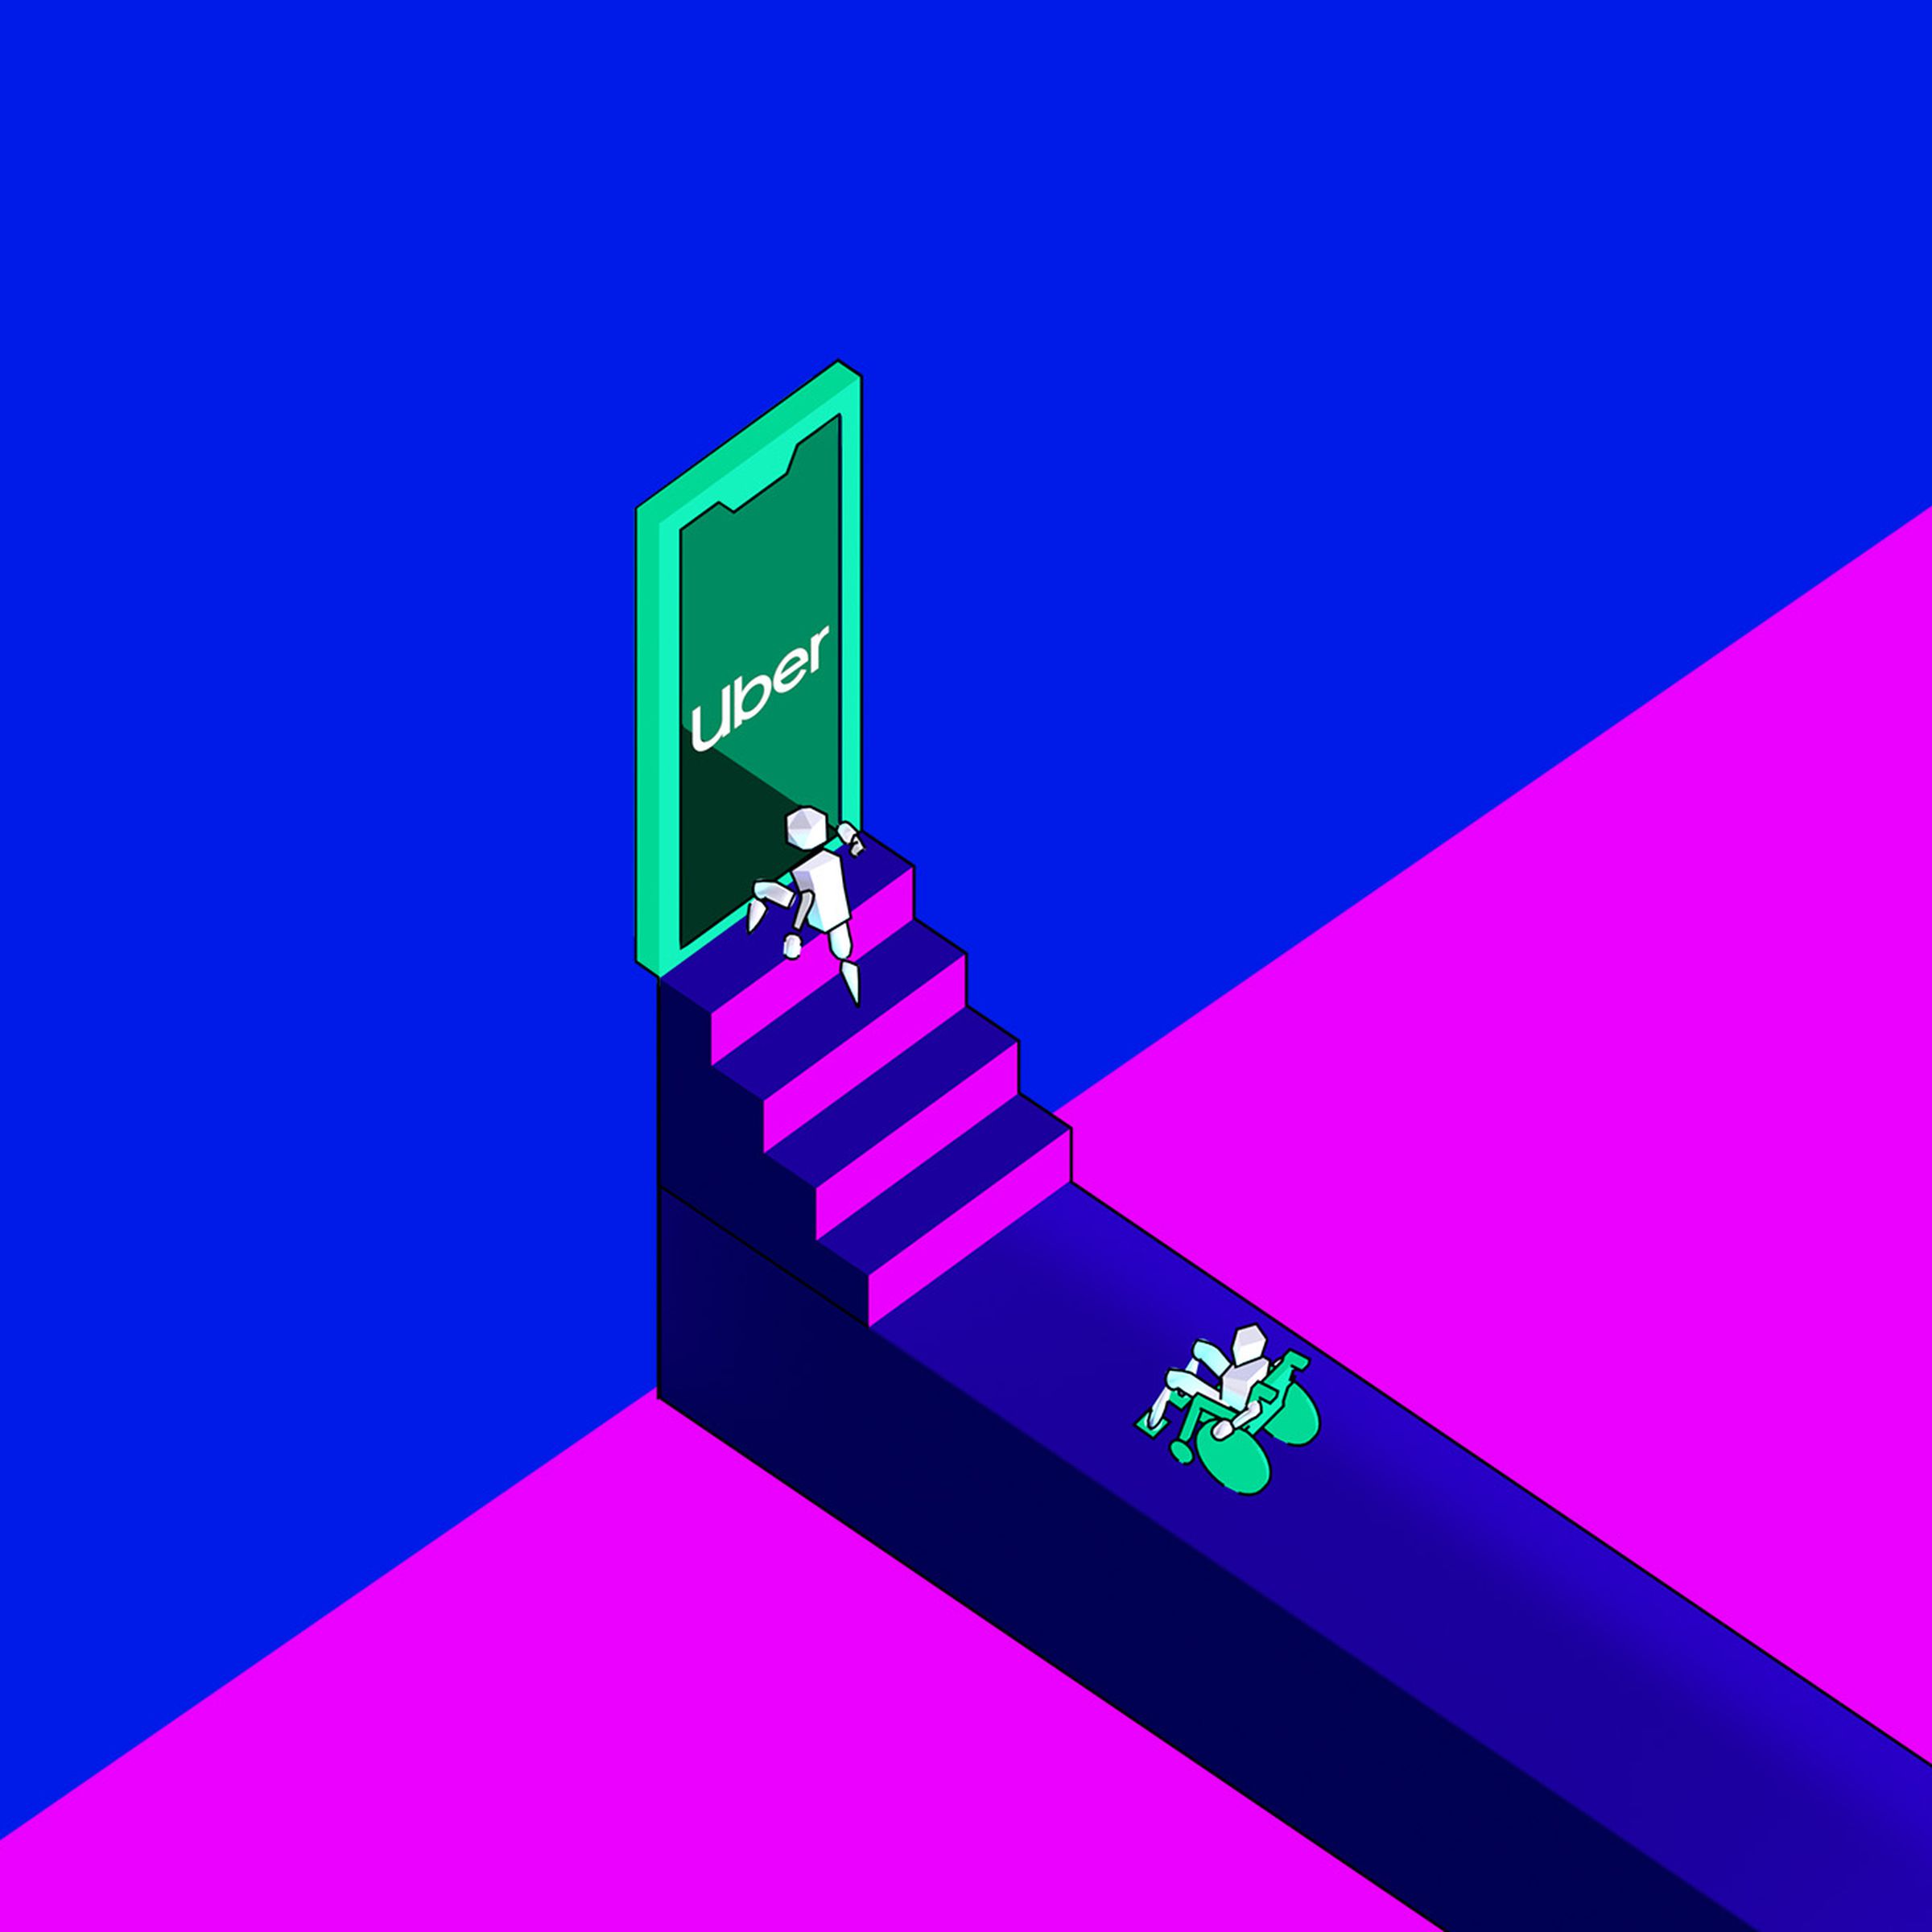 A character in a wheelchair watches from below as another character climbs stairs and walks through an opening in a wall labeled “Uber.” The opening is in the shape of a smartphone.